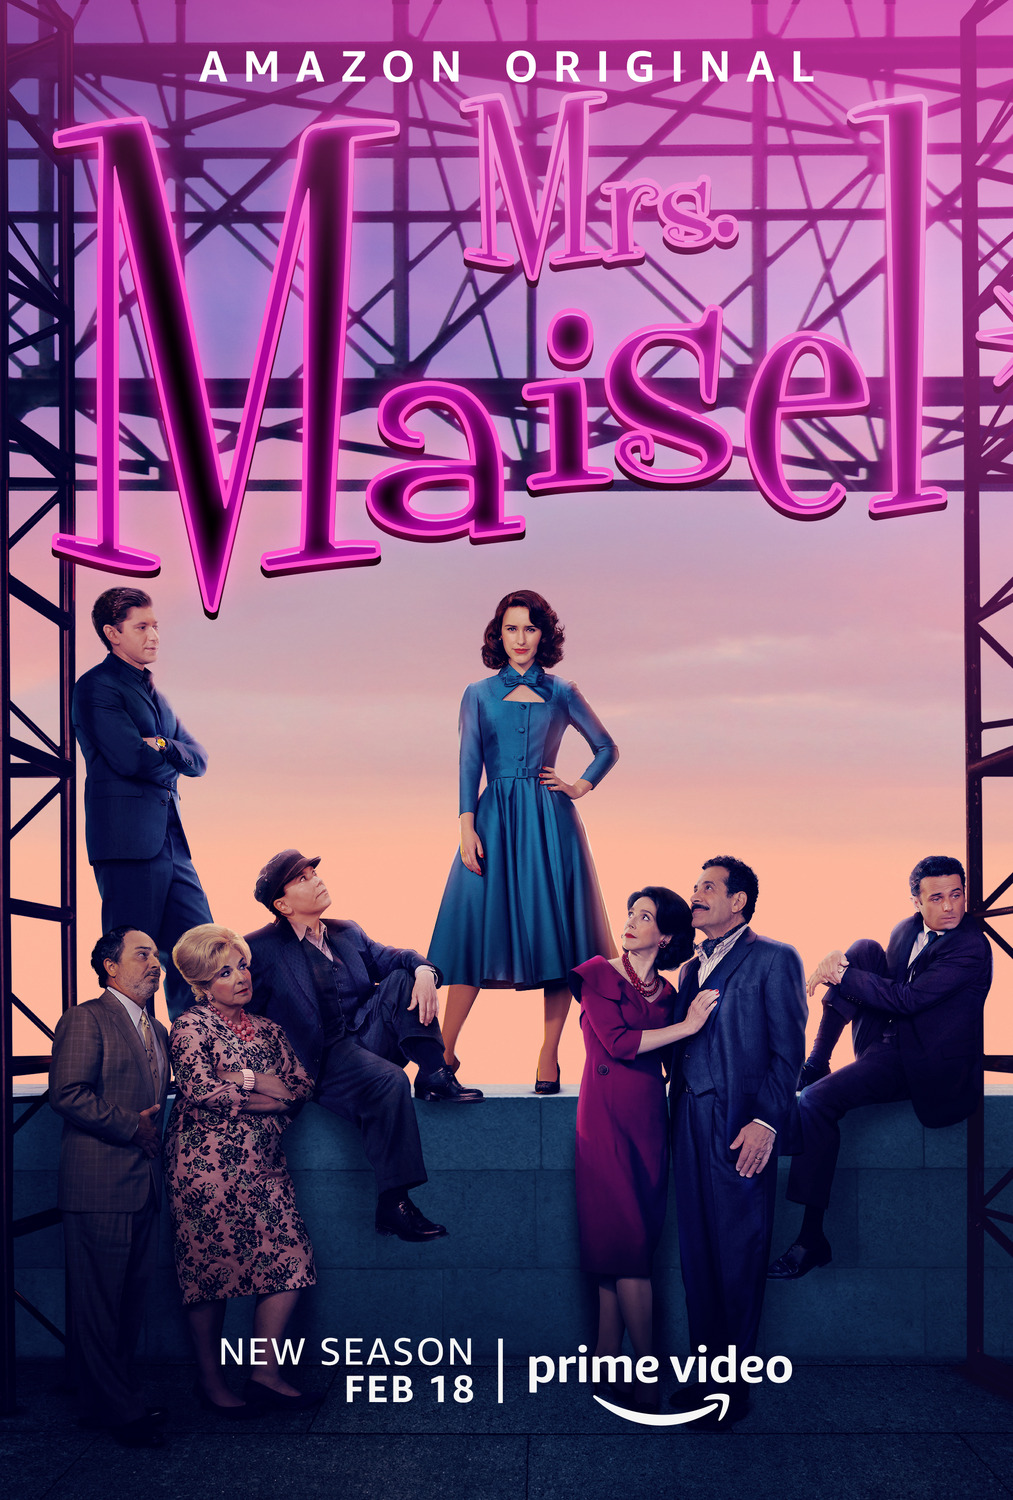 Extra Large Movie Poster Image for The Marvelous Mrs. Maisel (#13 of 13)